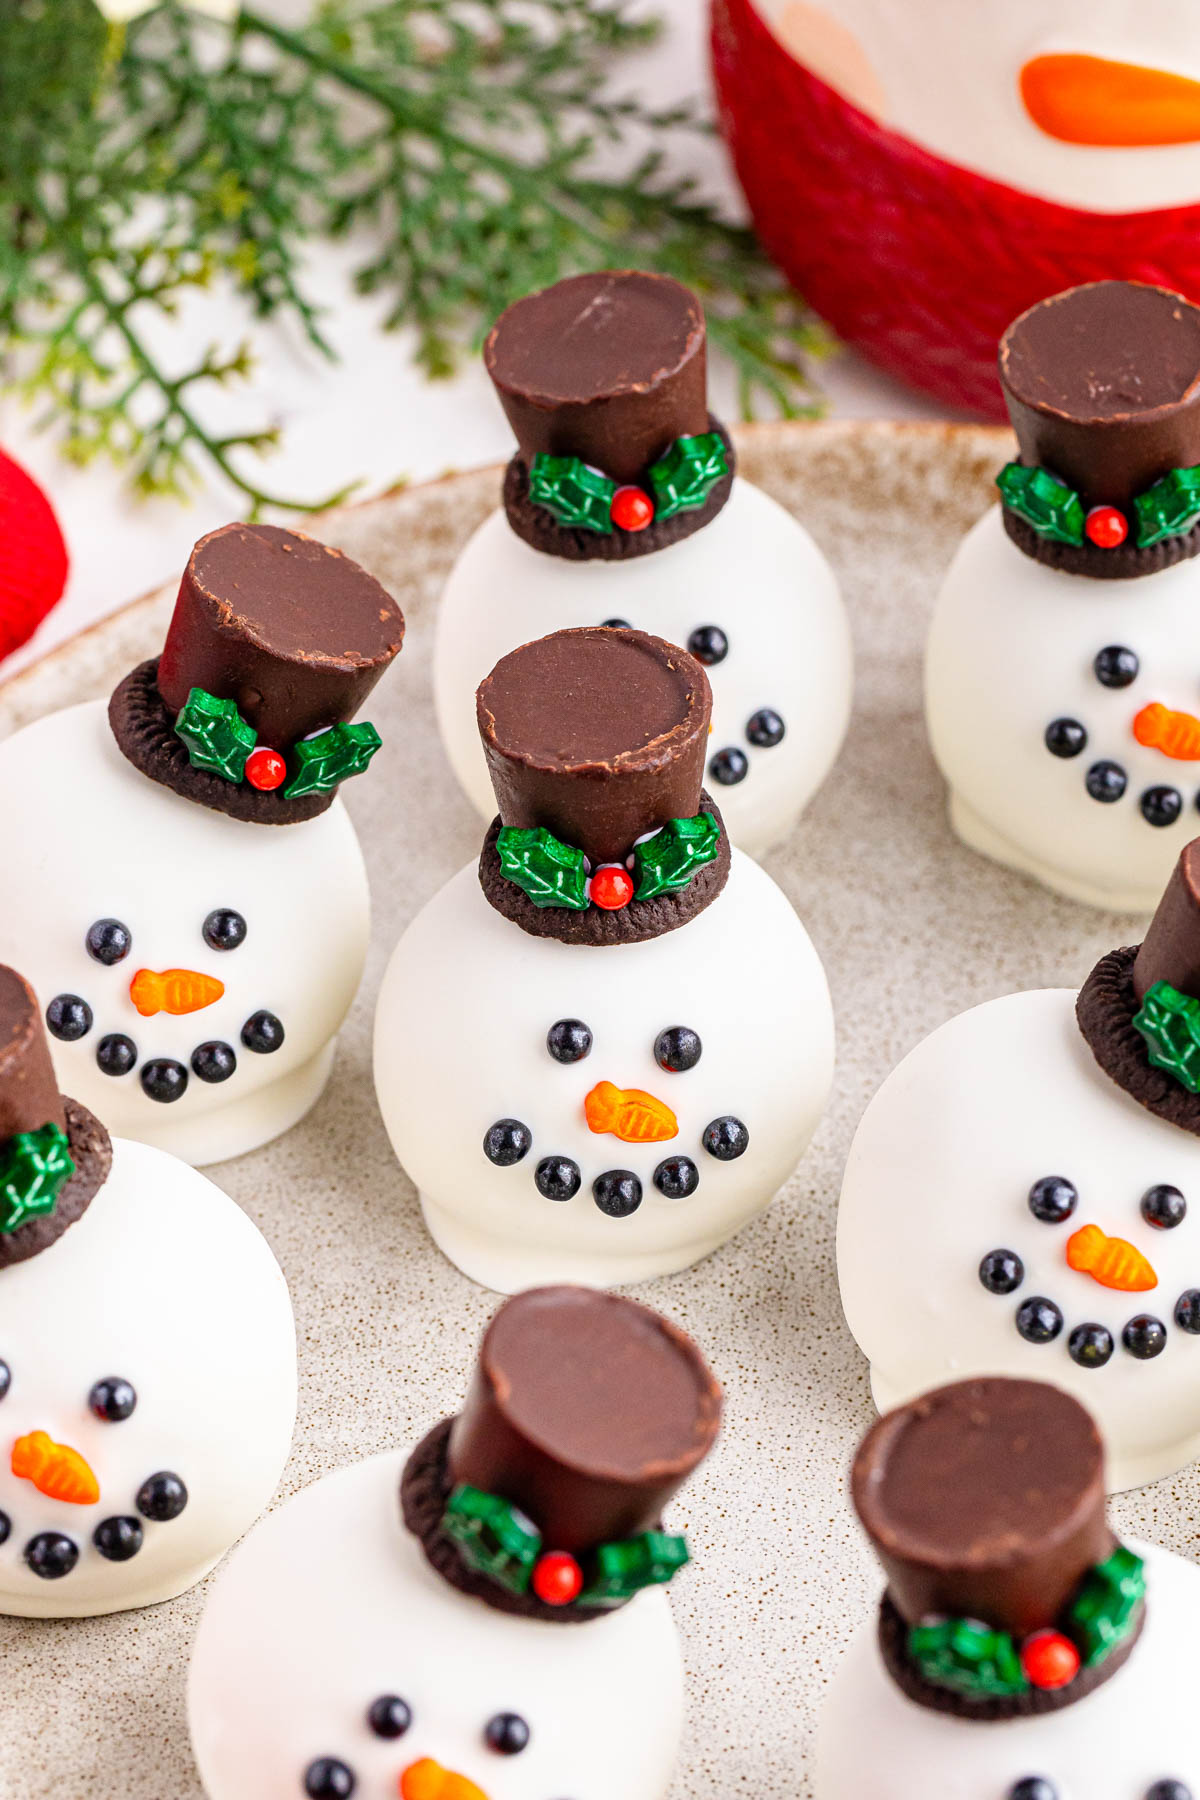 Snowman cookies with chocolate hats on a plate.